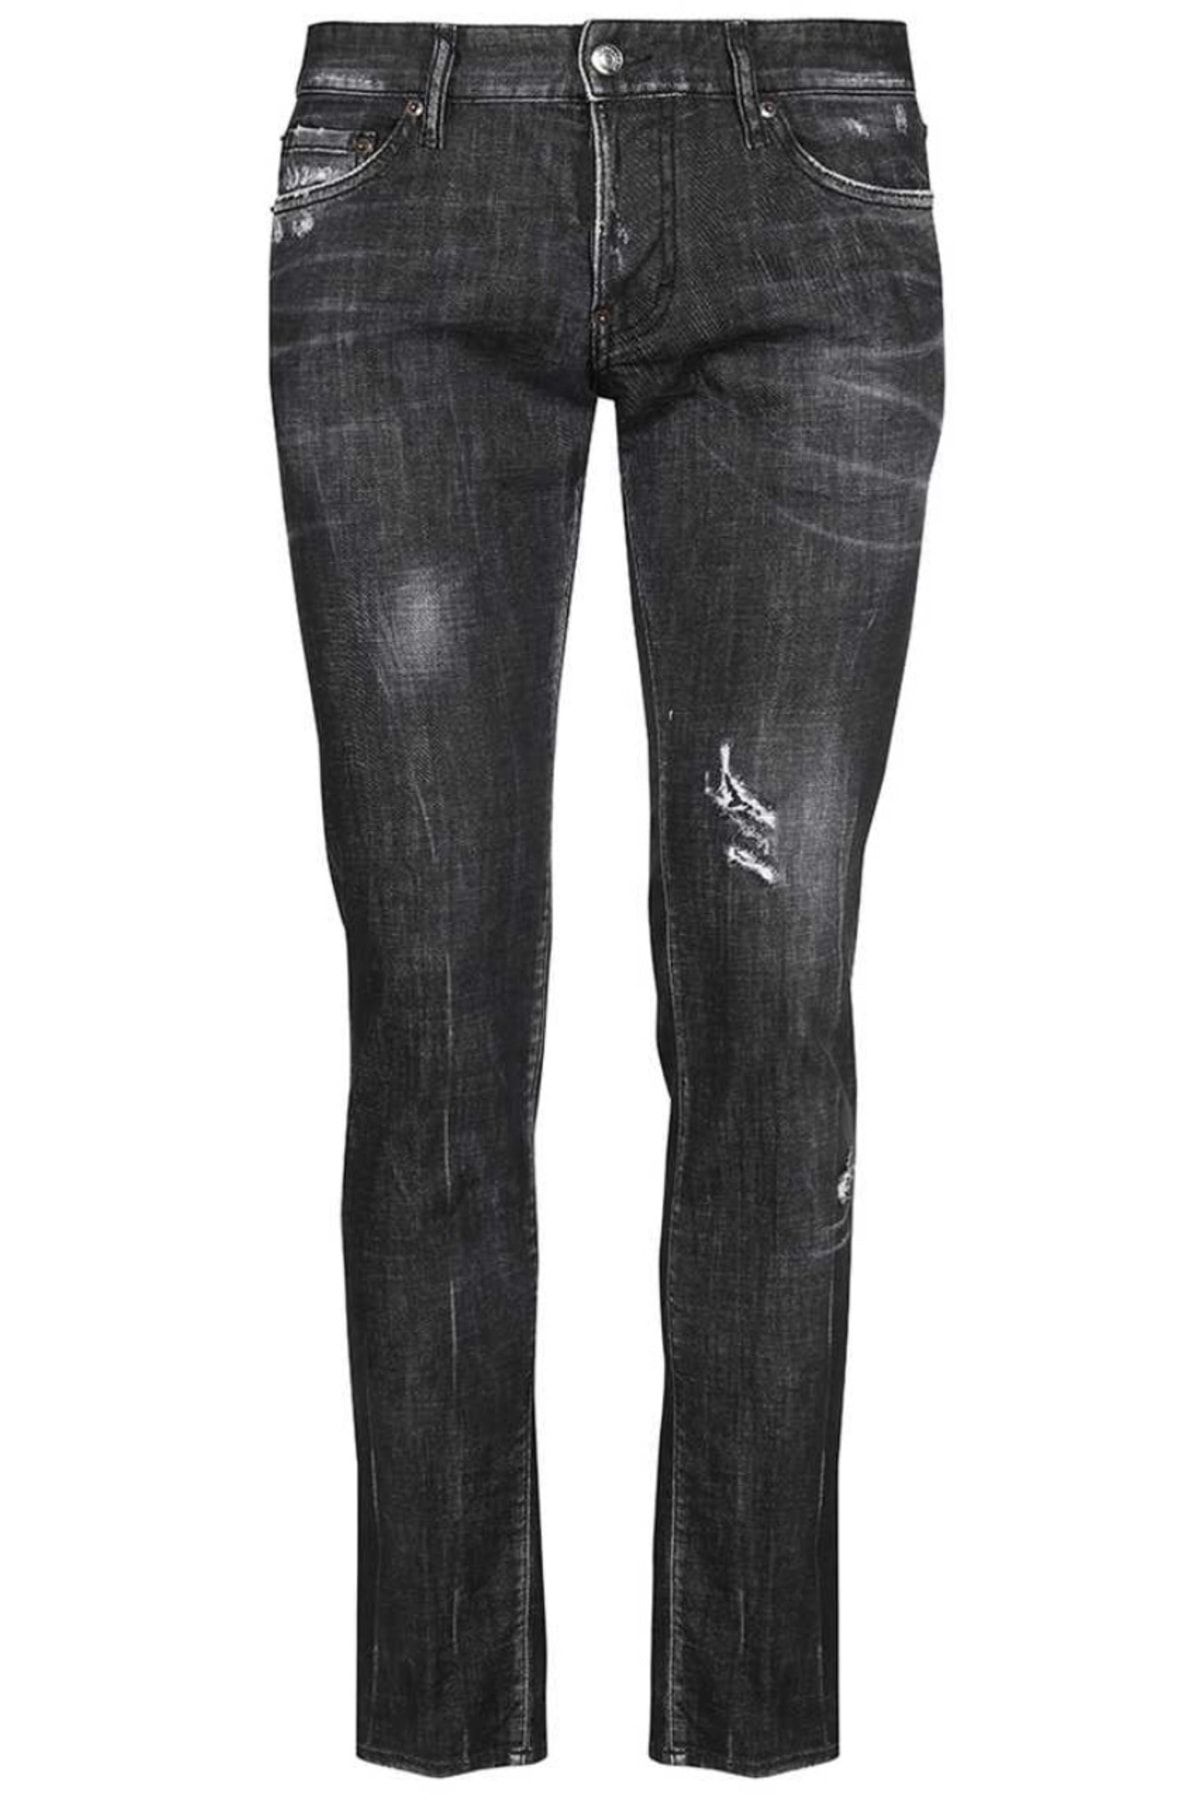 DSquared2 Distressed Straight Leg Jeans